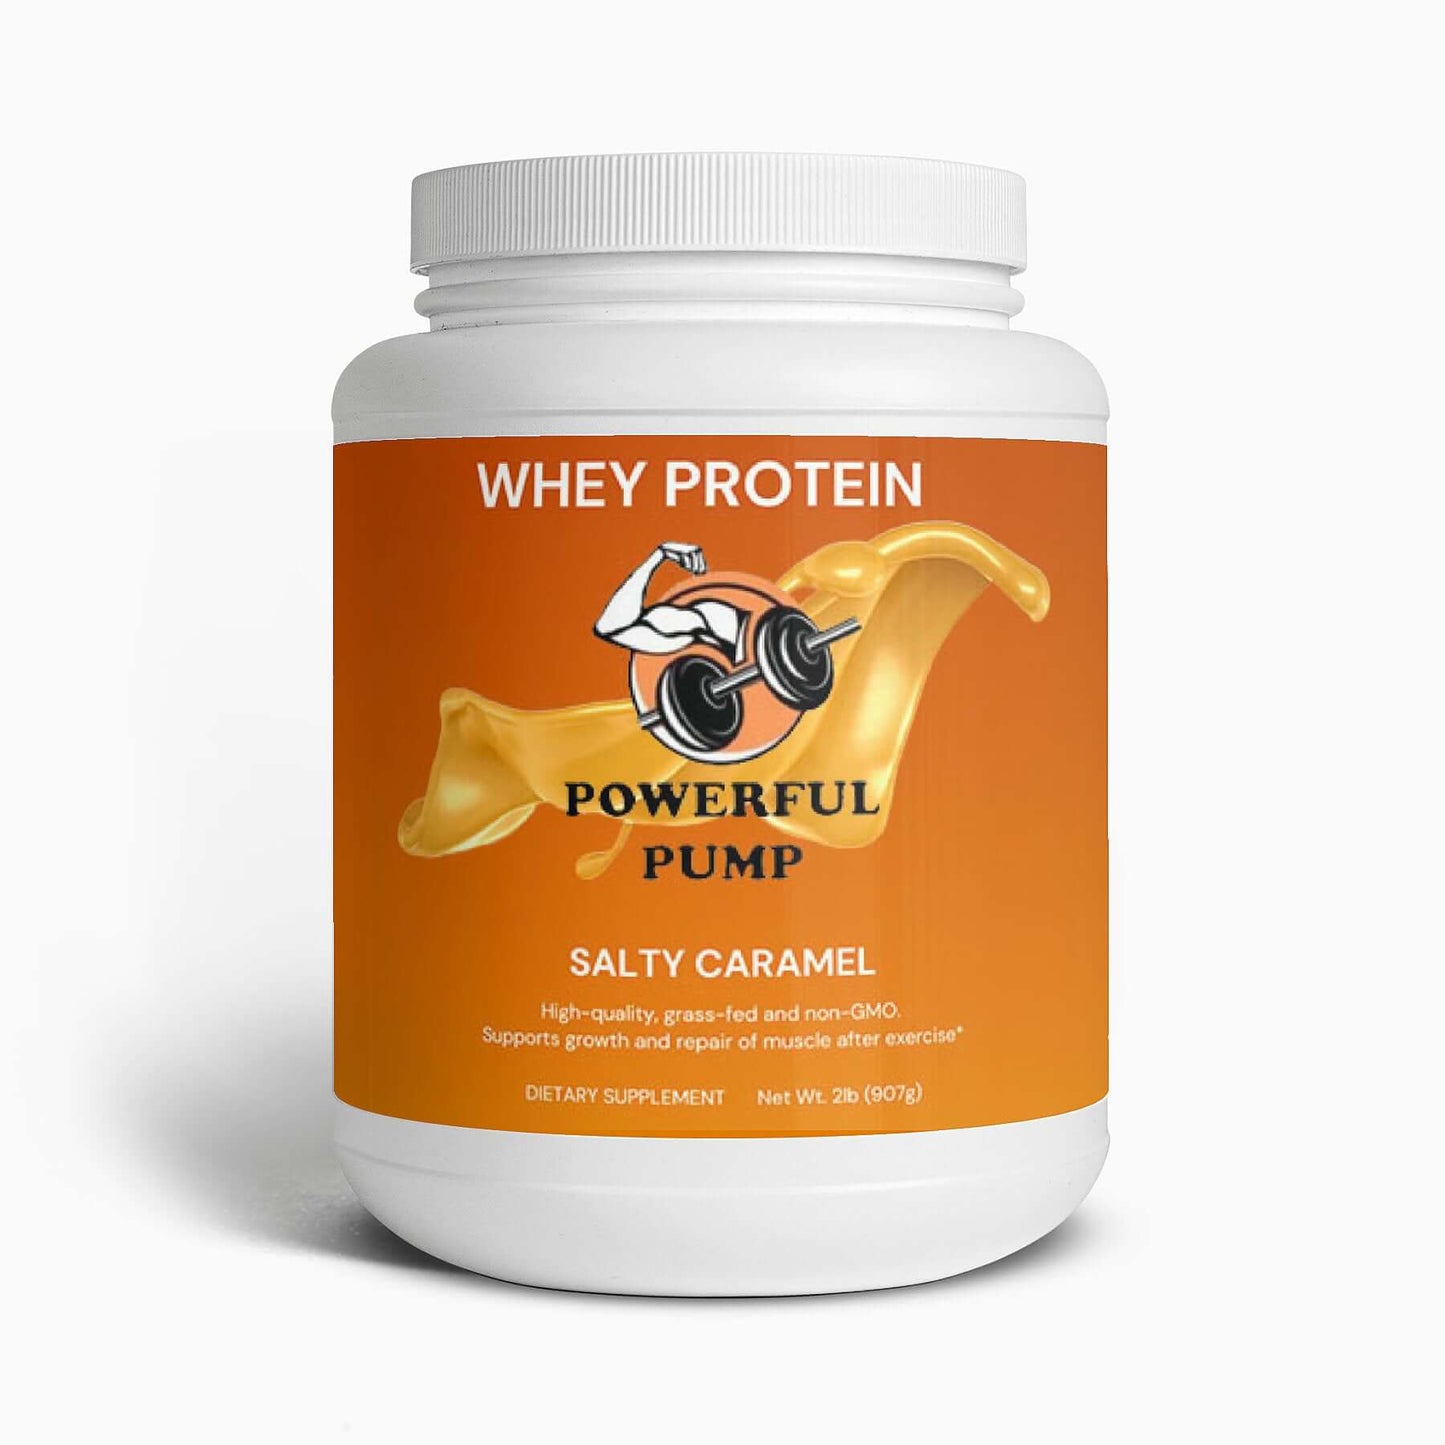 Whey Protein (Salty Caramel Flavor): Elevate your protein game with the delectable taste of salty caramel in our premium whey protein, perfect for satisfying your sweet cravings post-workout.